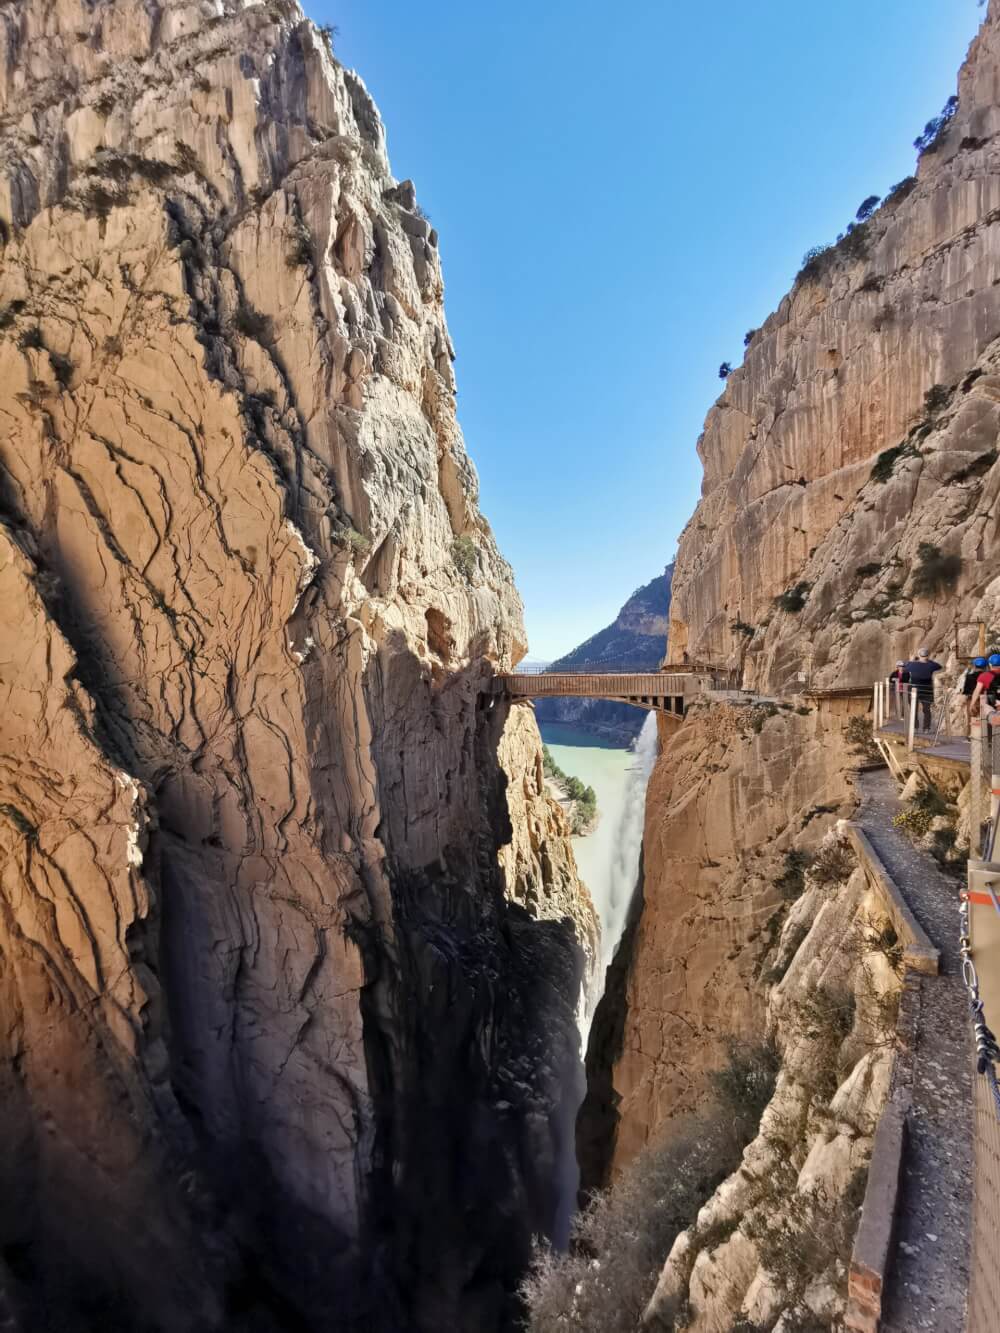 There is a small pedestrian bridge in the middle of a gorge